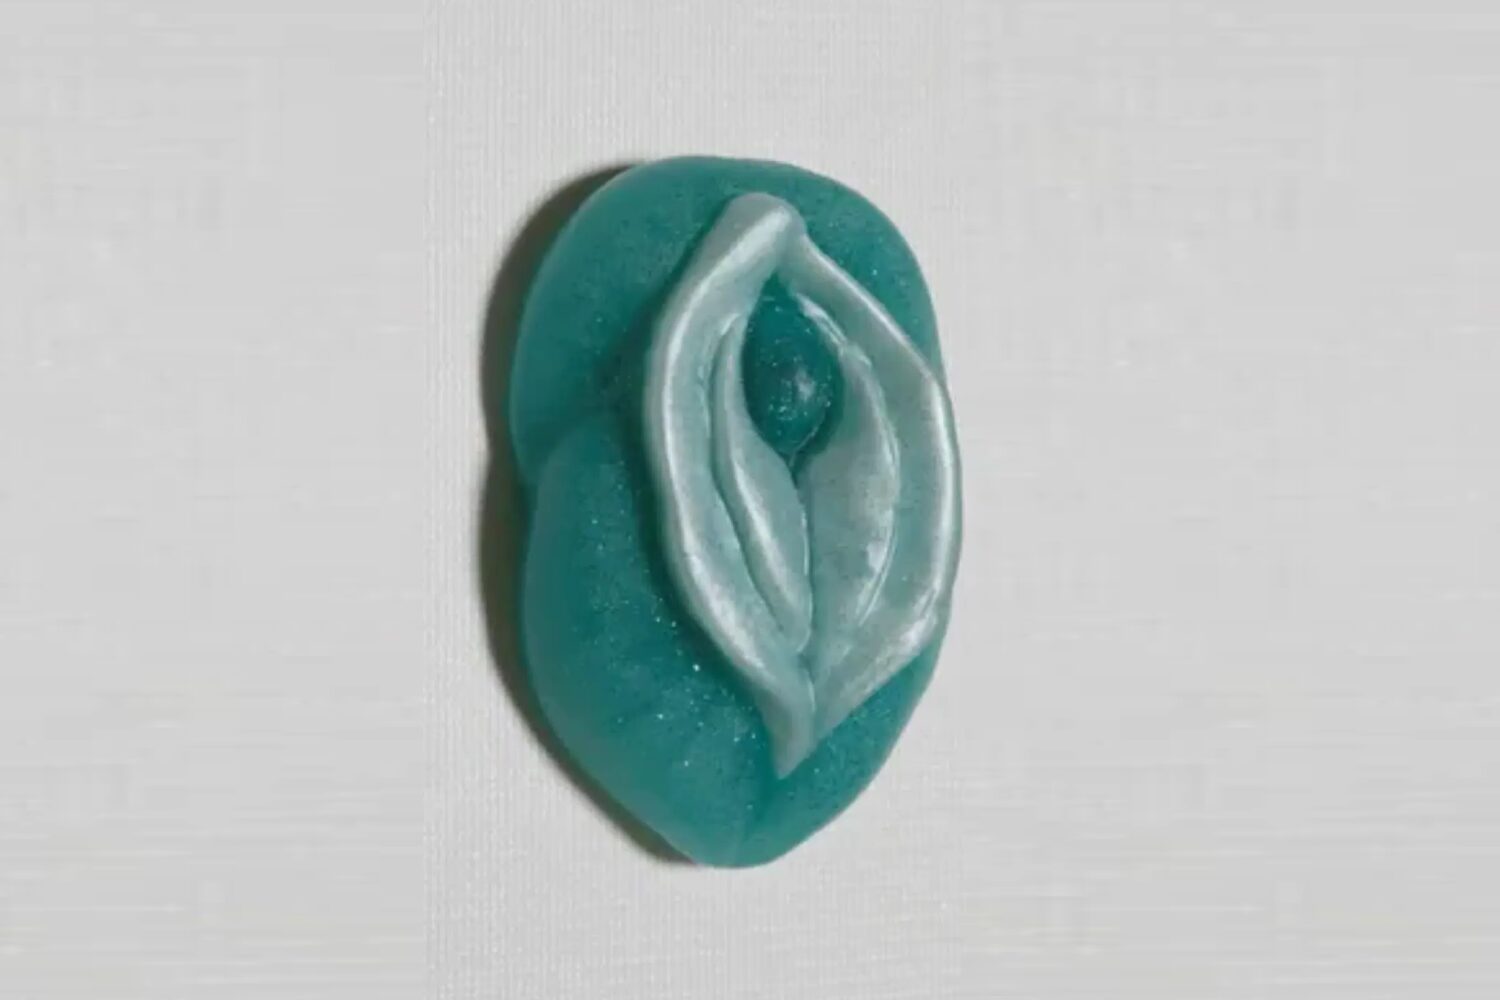 A blue and white button with an image of a woman 's breast.